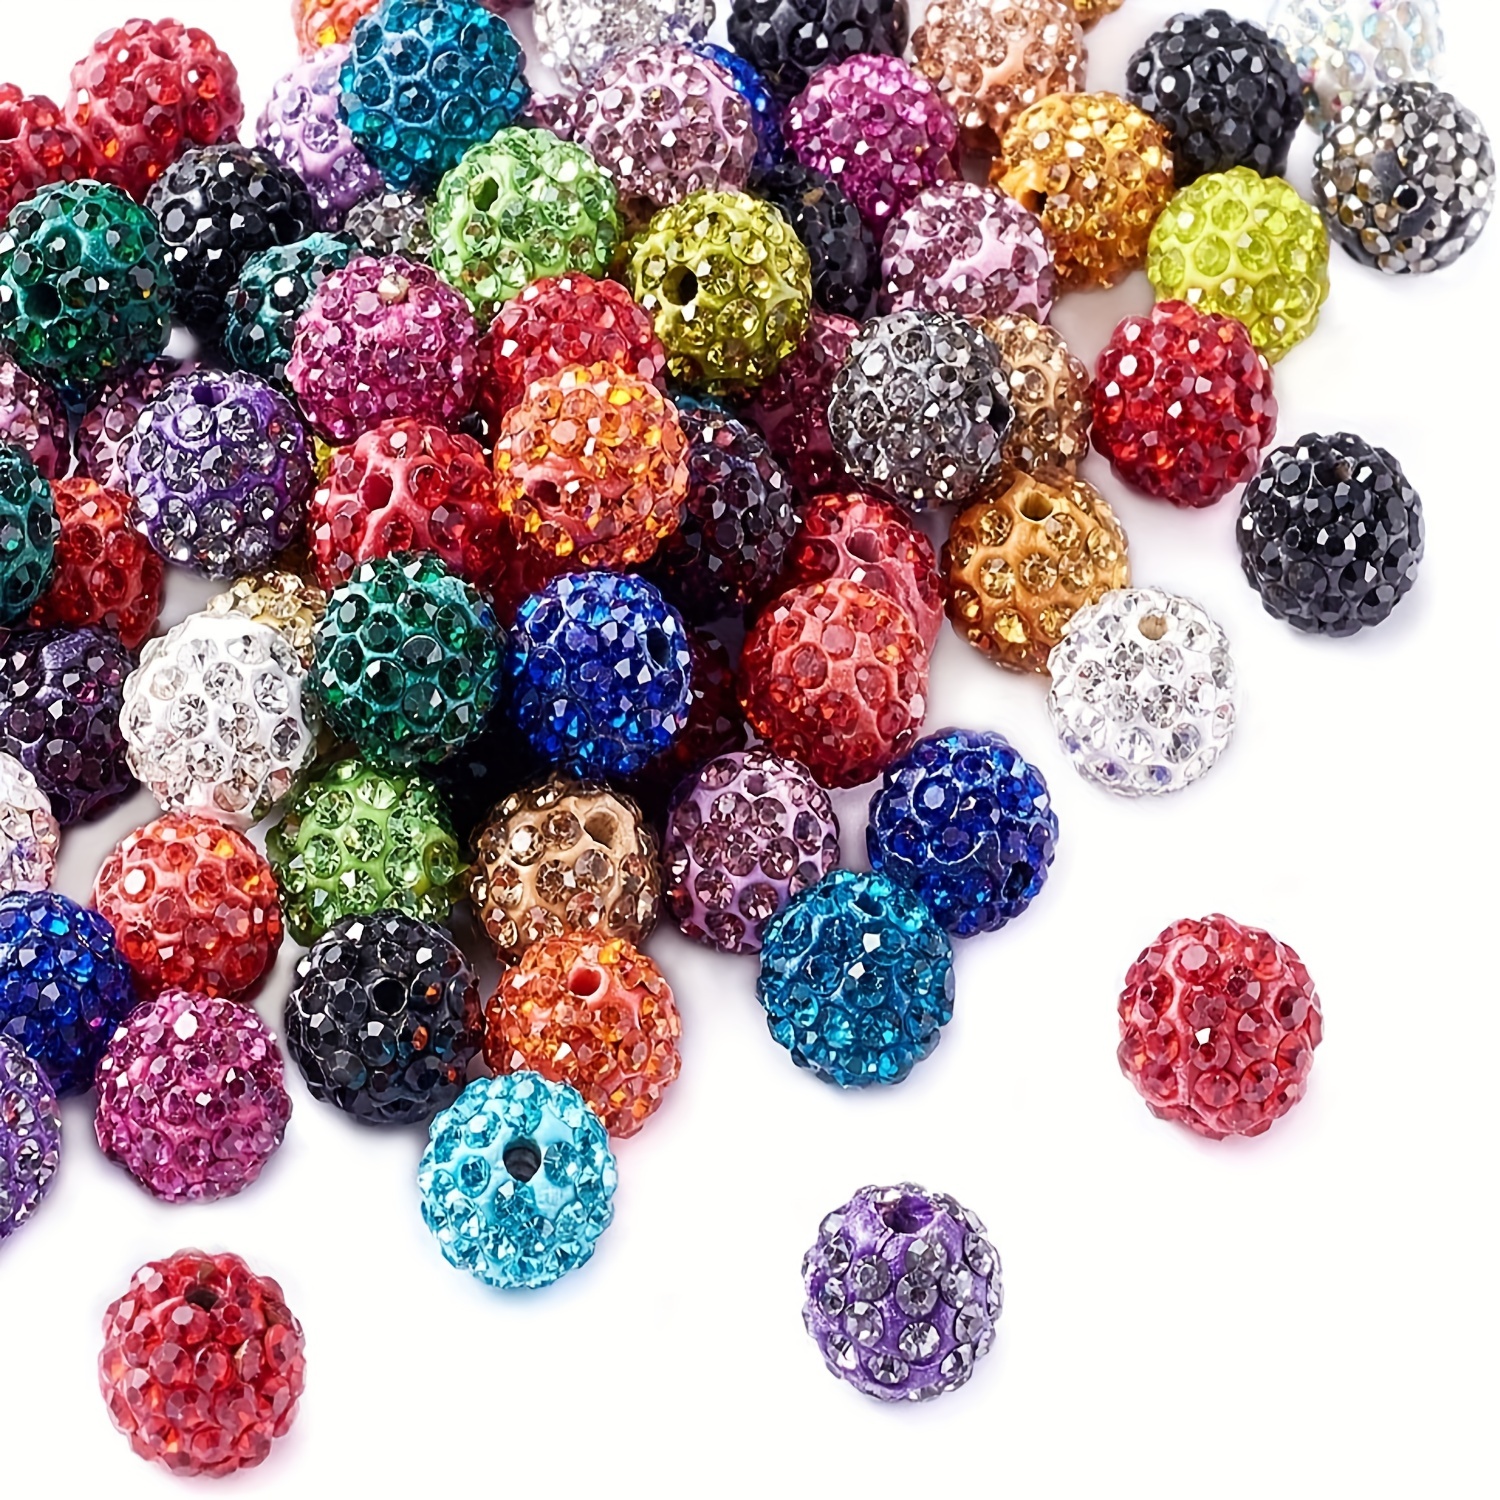 

100pcs 10mm Mixed Color Glass Rhinestone Clay Pave Round Beads, Disco Style Crystal Shamballa Beads For Diy Bracelet Necklace Other Hanging Decor Jewelry Making Crafts